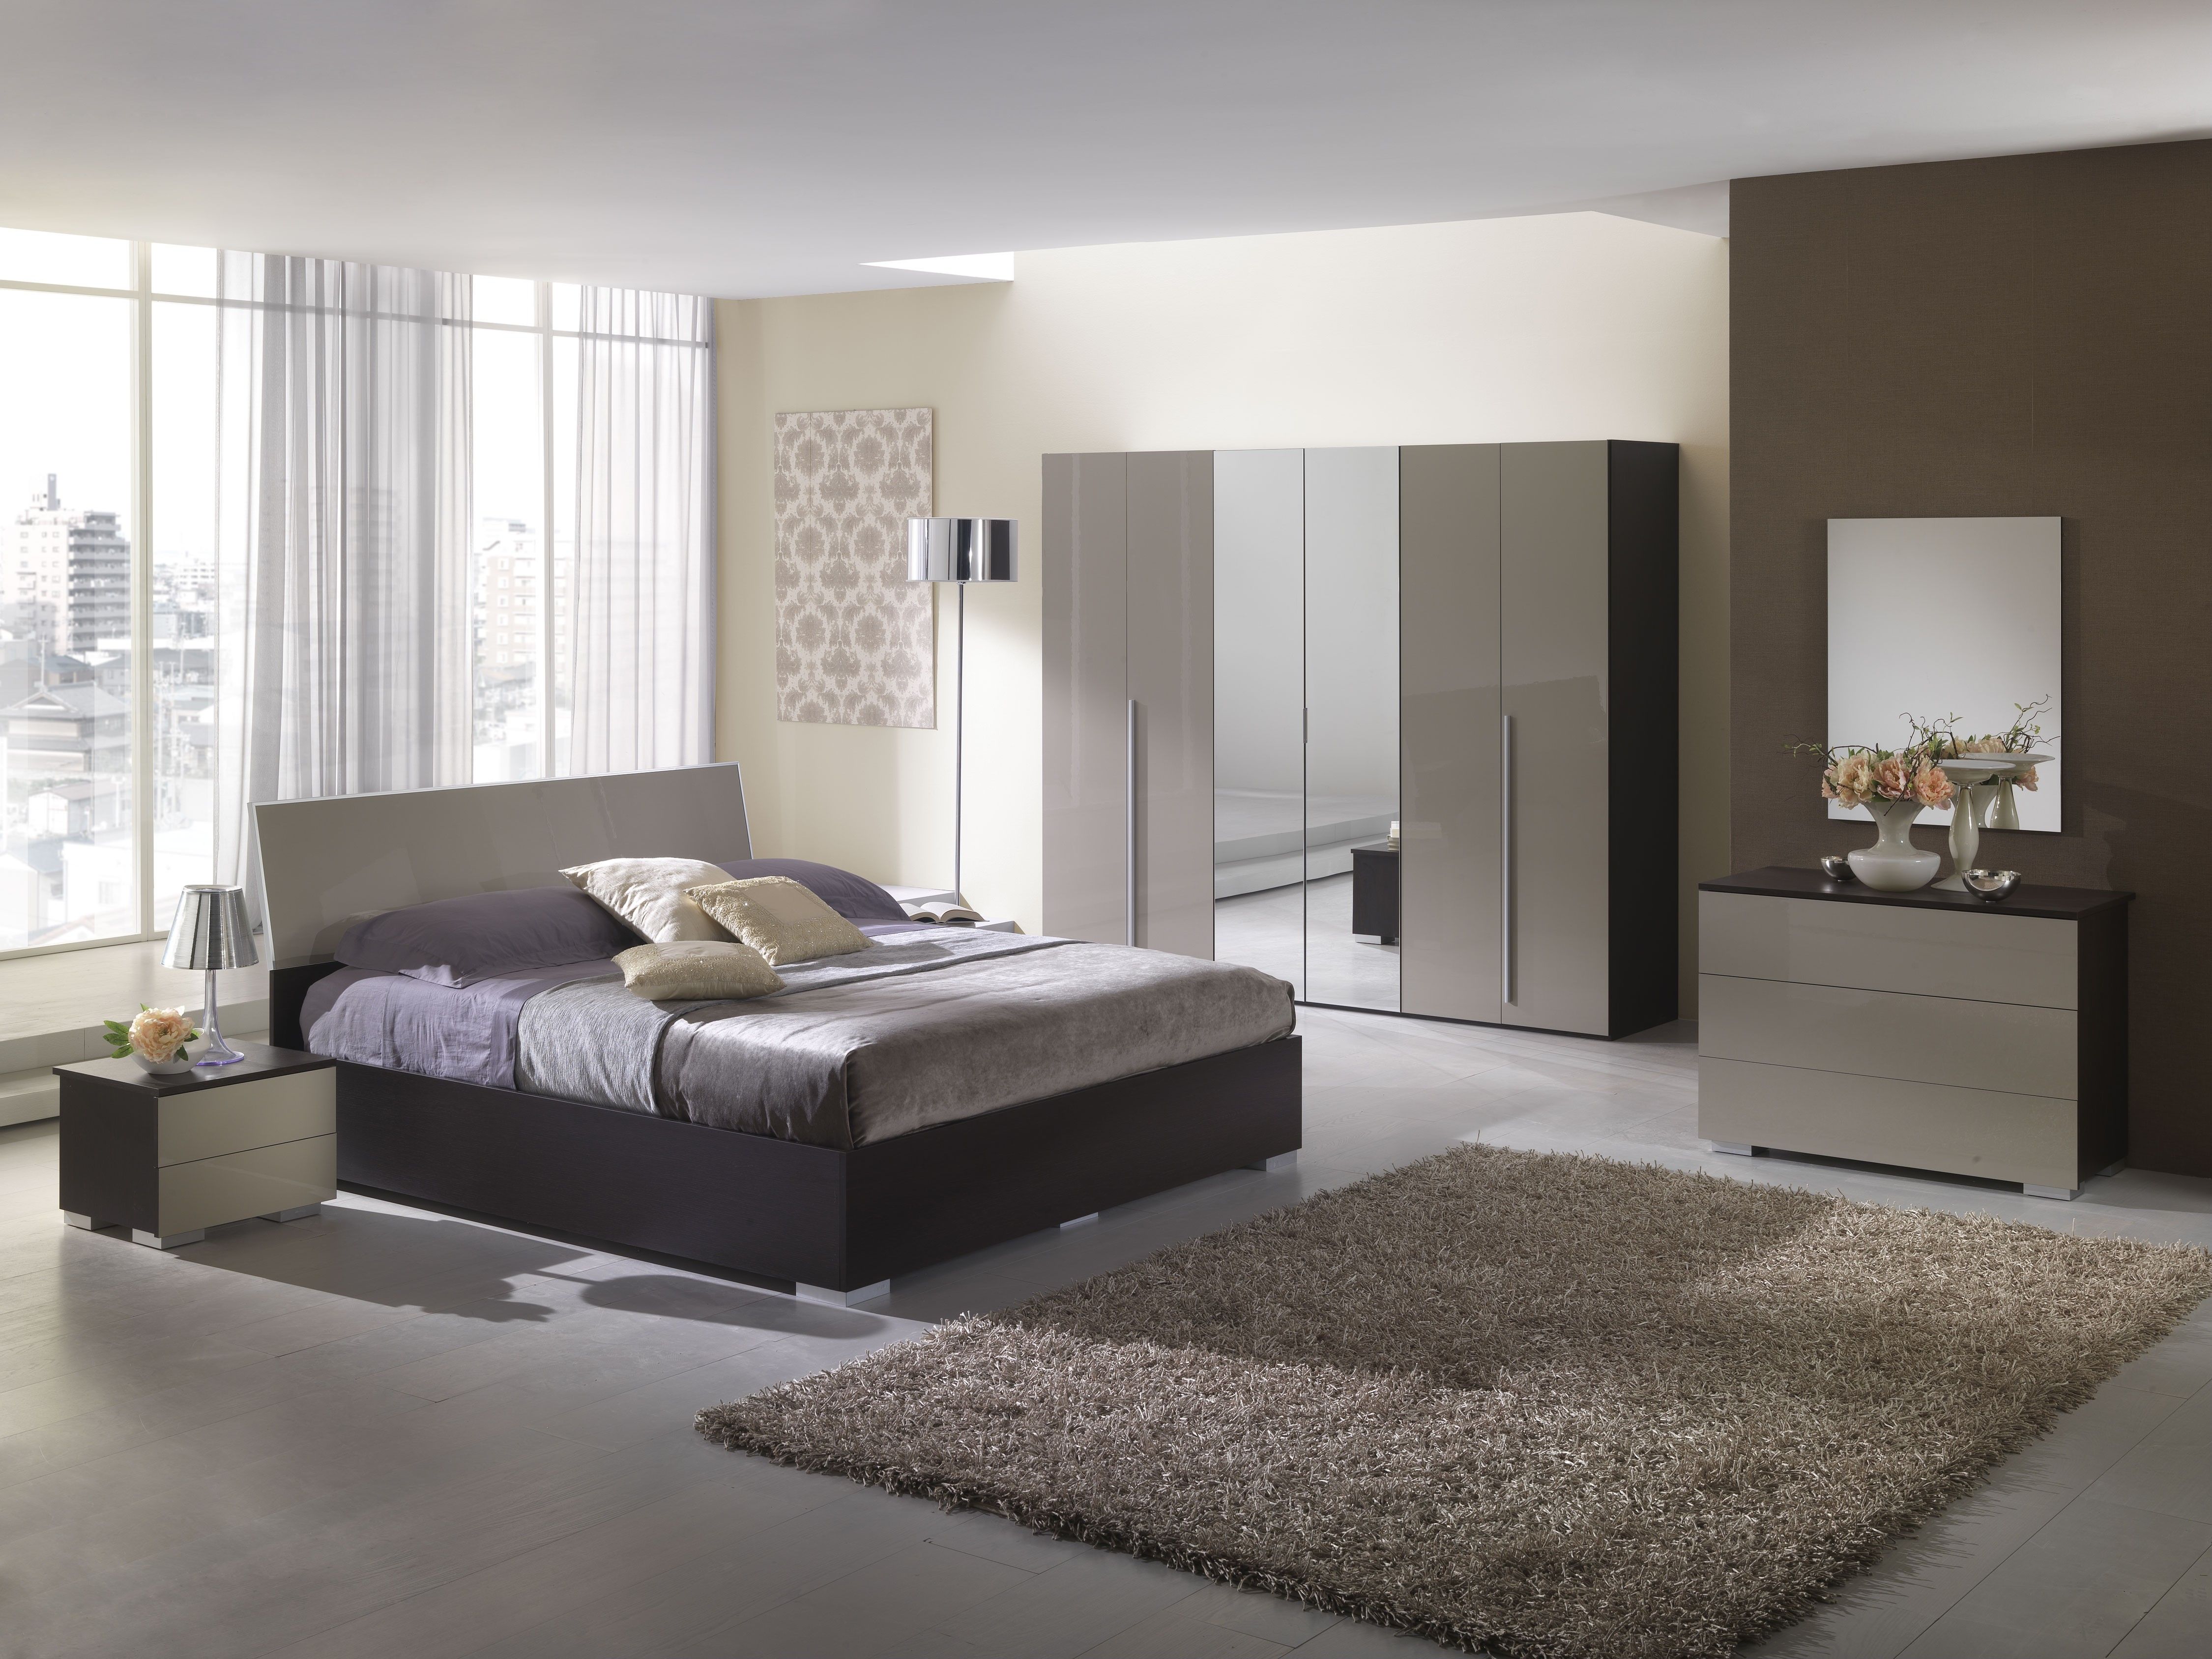 Bedroom Awesome Modern Bedroom Furniture With Pretty Creamy Fur Throughout Modern Bedroom Rugs (View 5 of 15)